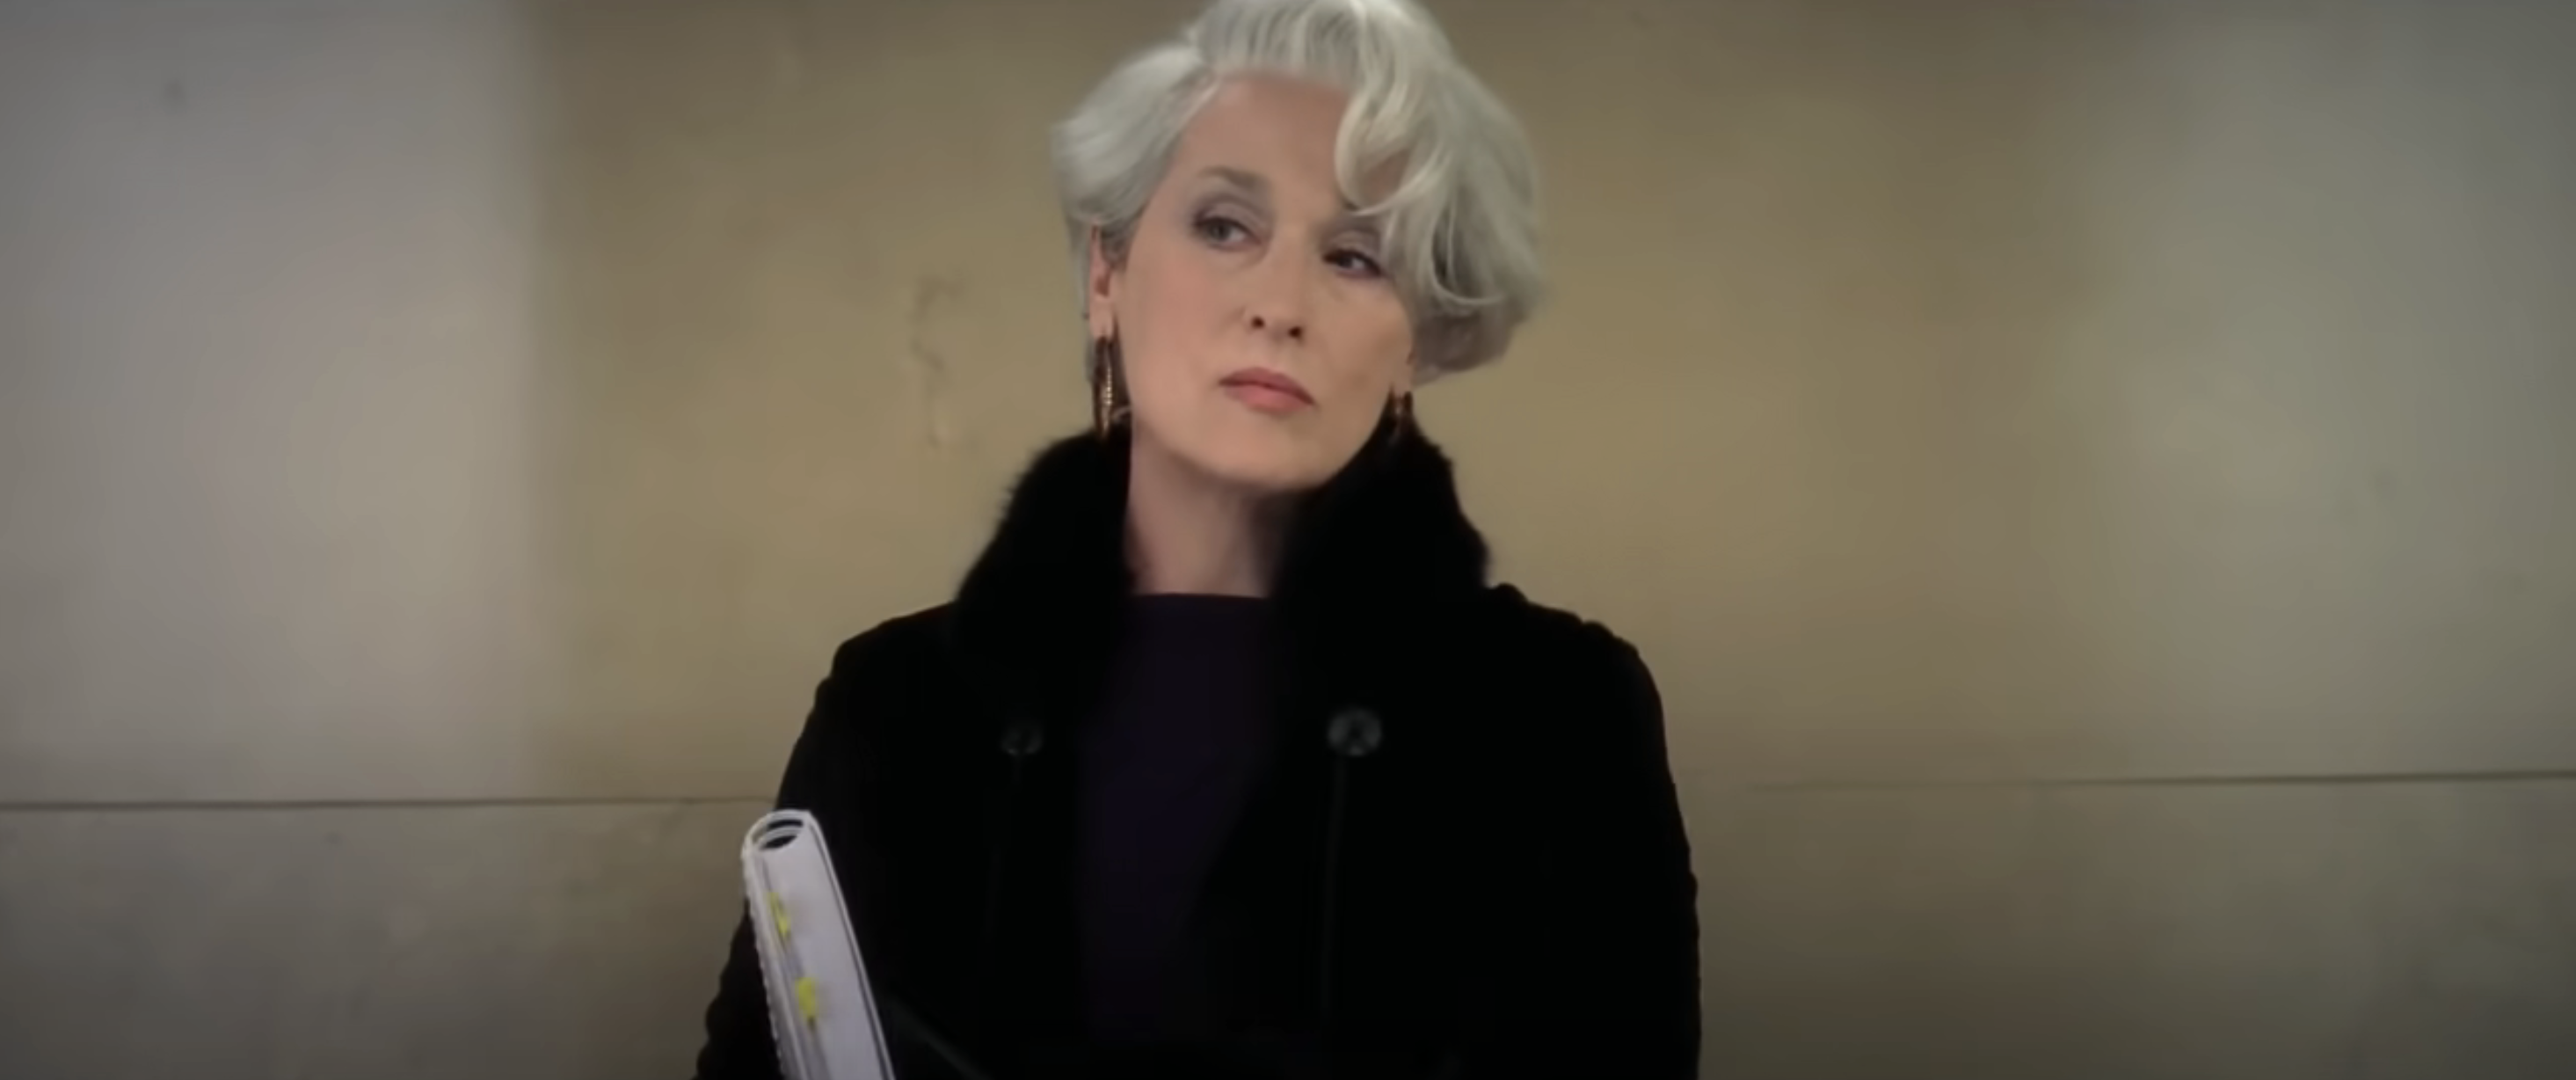 Miranda Priestly, portrayed by Meryl Streep in &#x27;The Devil Wears Prada&#x27;, is shown looking stern with a fur-trimmed coat